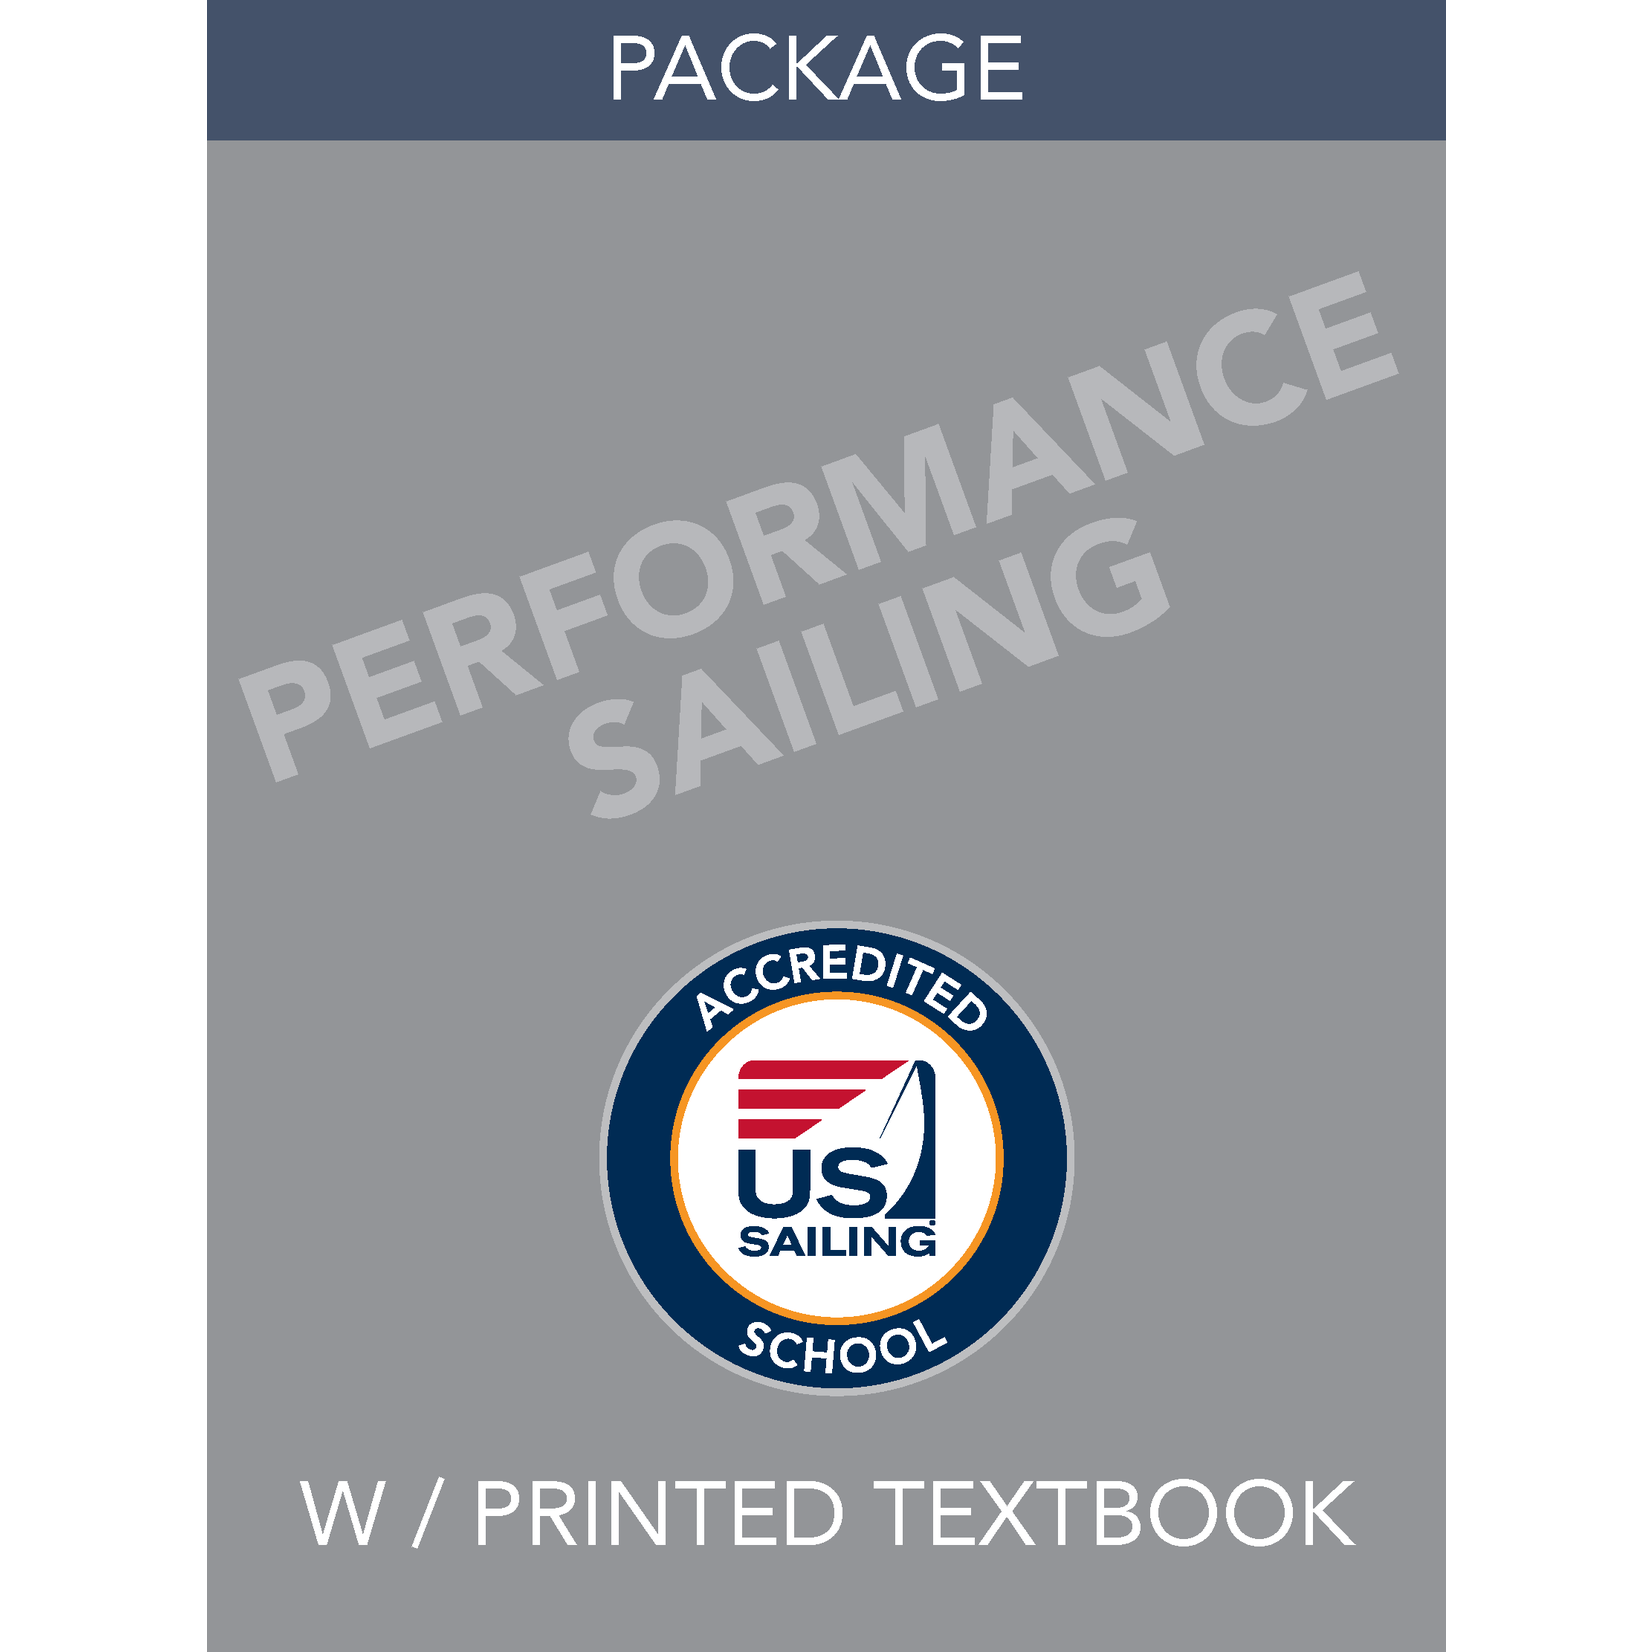 PACKAGE Performance Sailing Endorsement Package